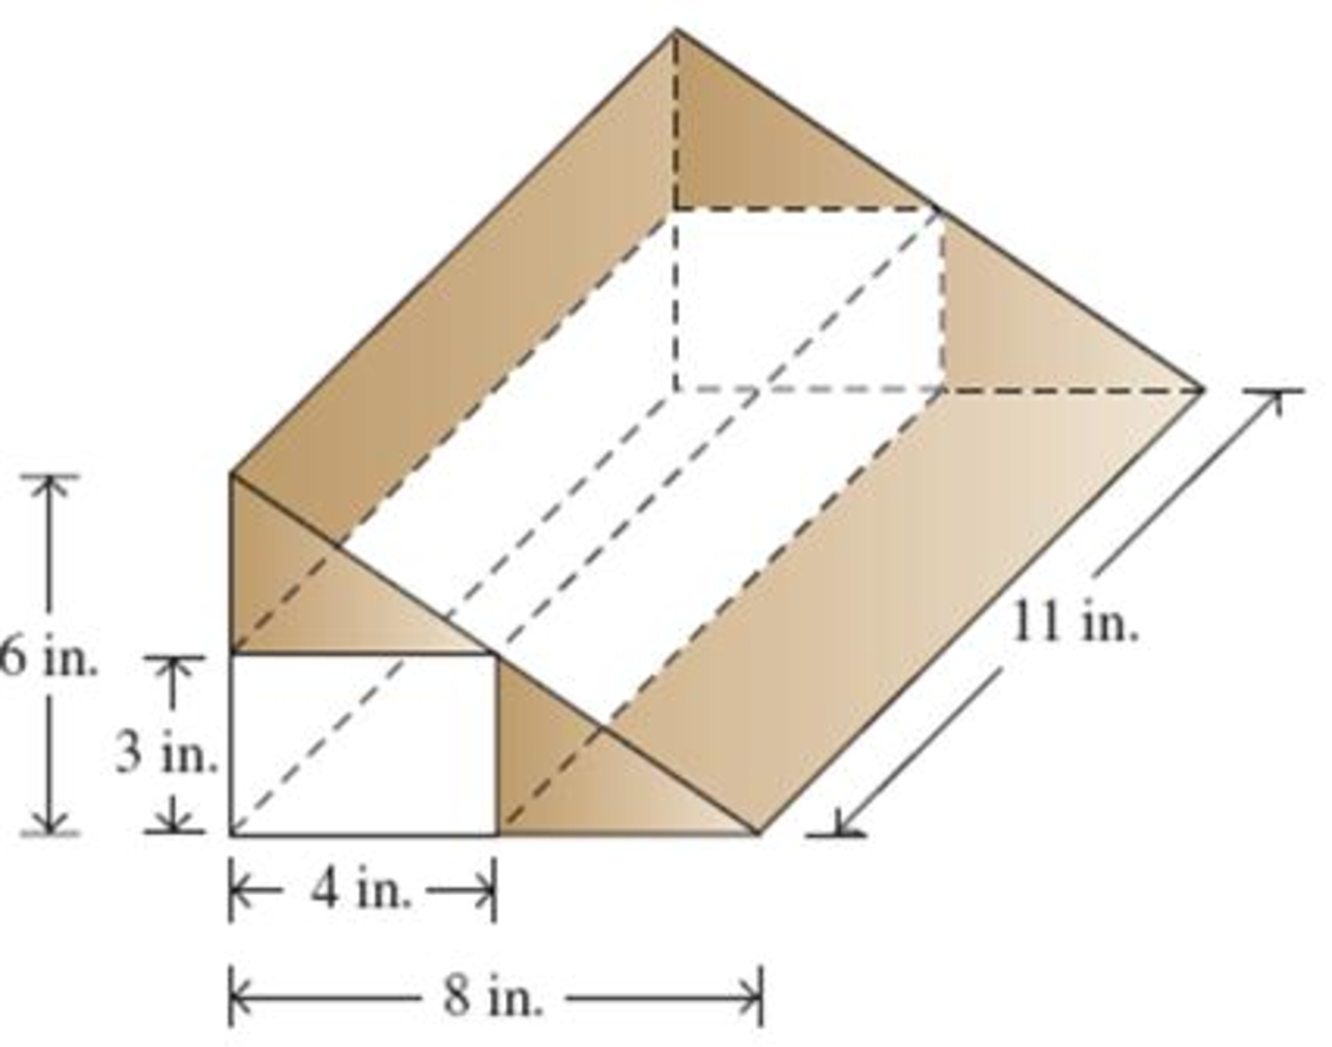 Chapter 8.4, Problem 26E, In Exercises 19-26, determine the volume of the shaded region. When appropriate, use the  key on 